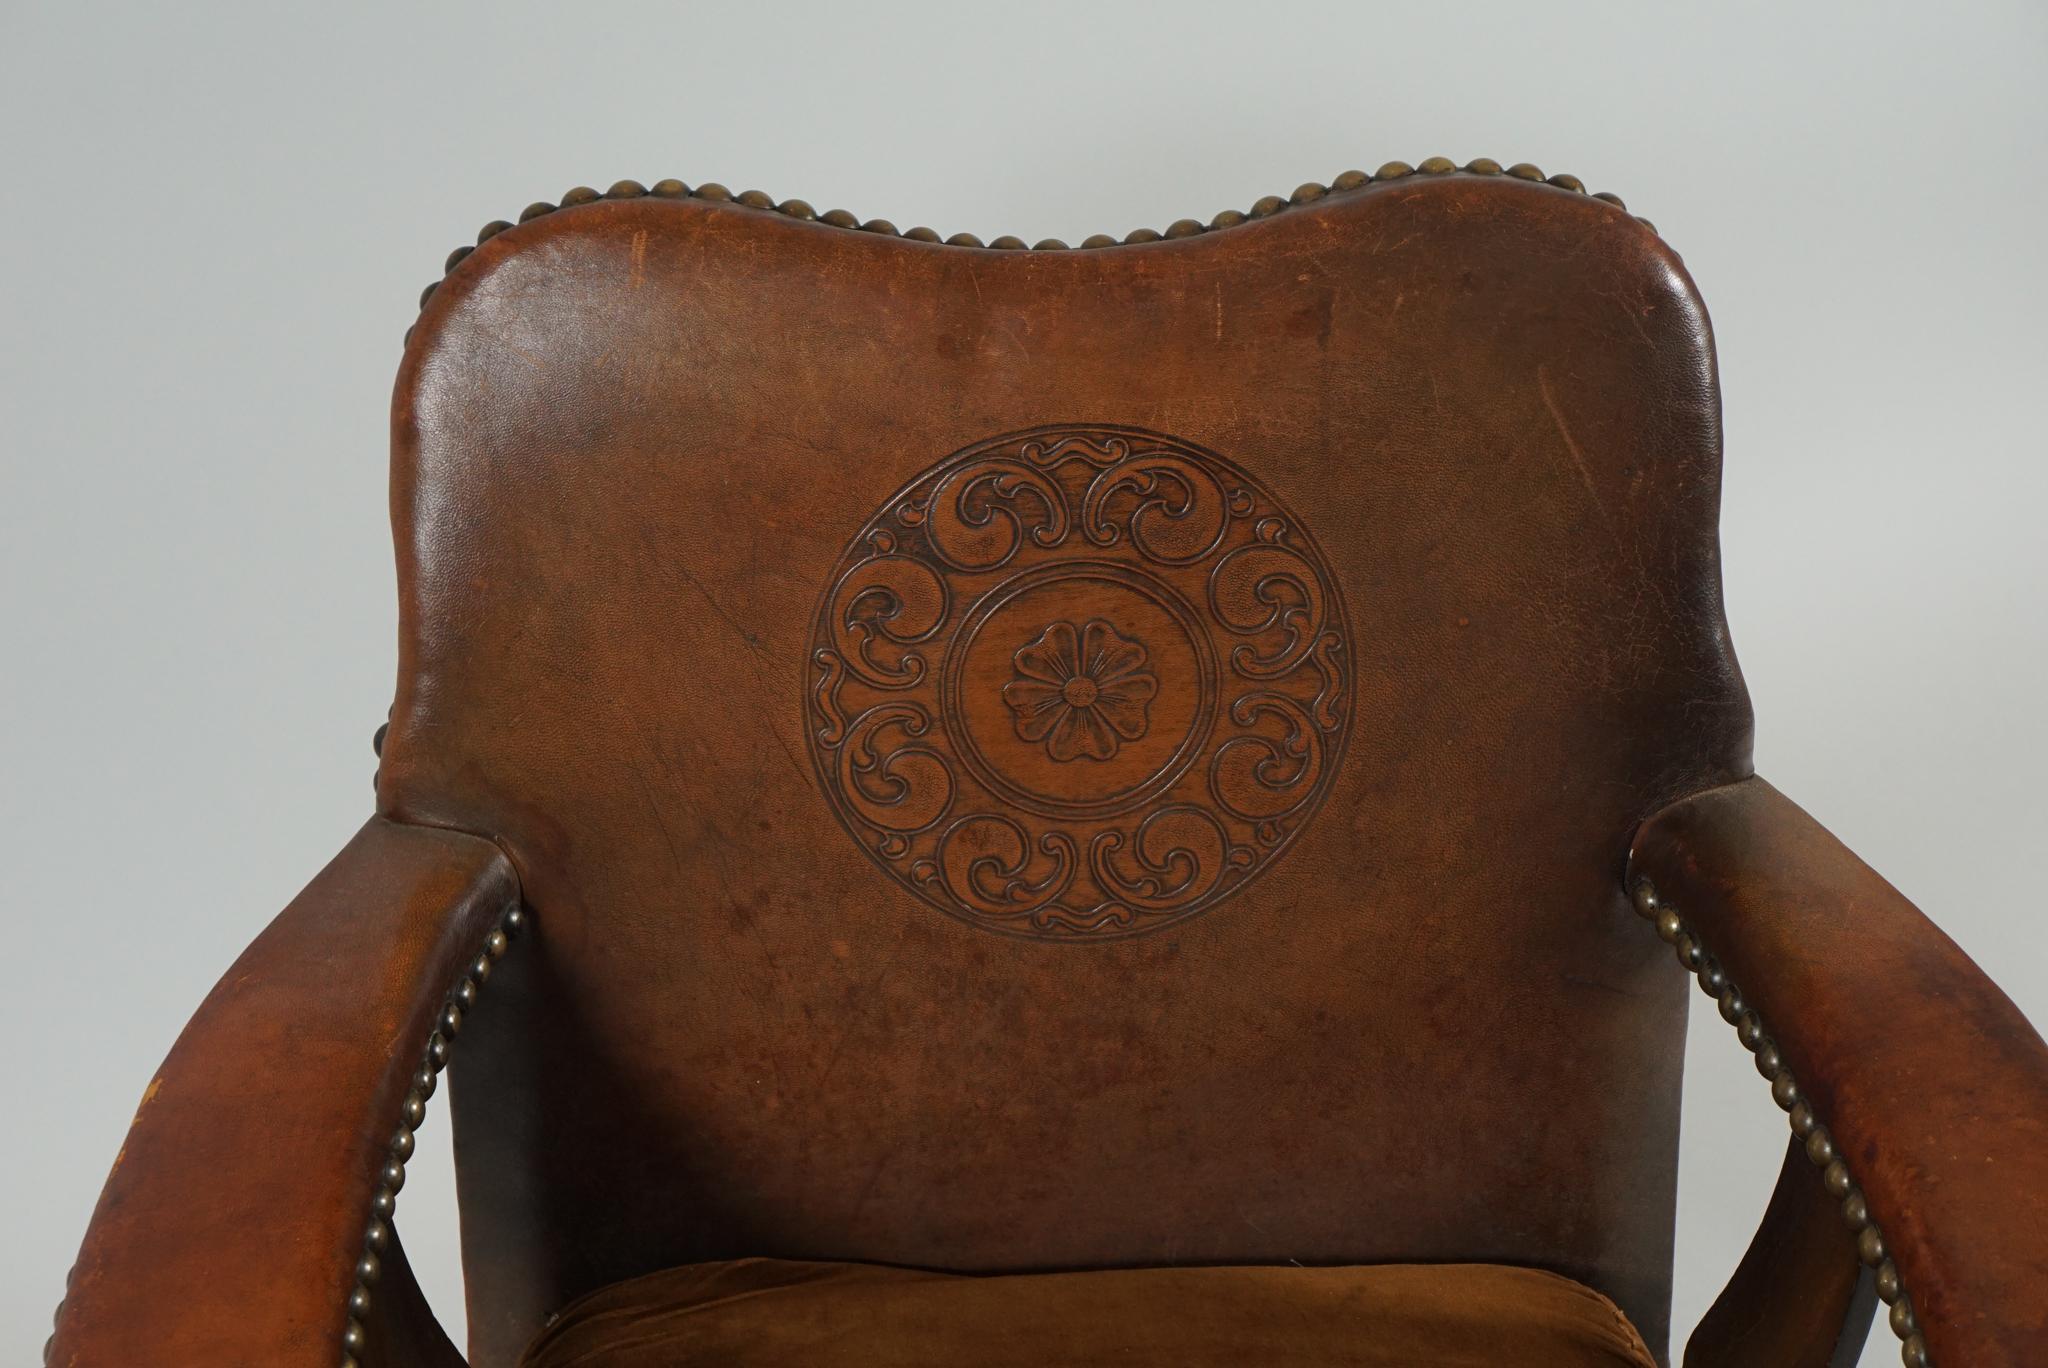 Pair of Arts & Crafts armchairs with leather covered arms and back, with large brass studs.
The chairs are in oak with carved rondel on the front legs the leather of the inside backrest
has an impressed floral stamp with a center stylized rose.